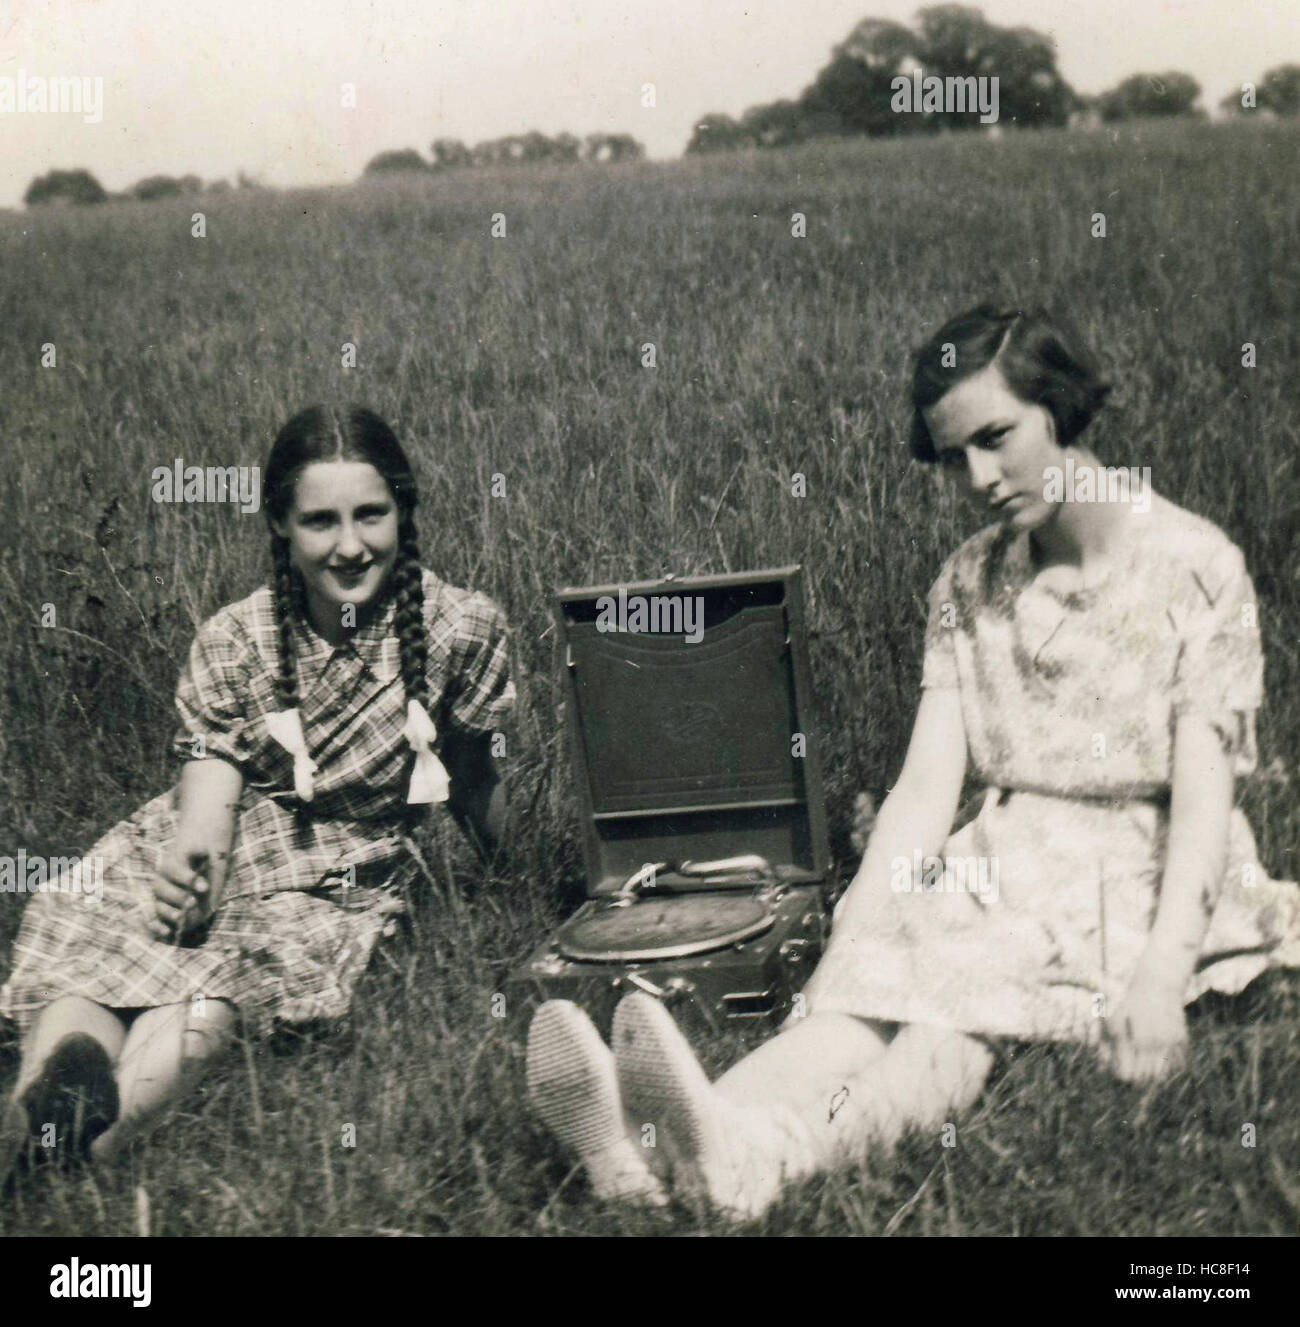 Historic archive image of two young women with gramophone / record player in field c1930s Stock Photo